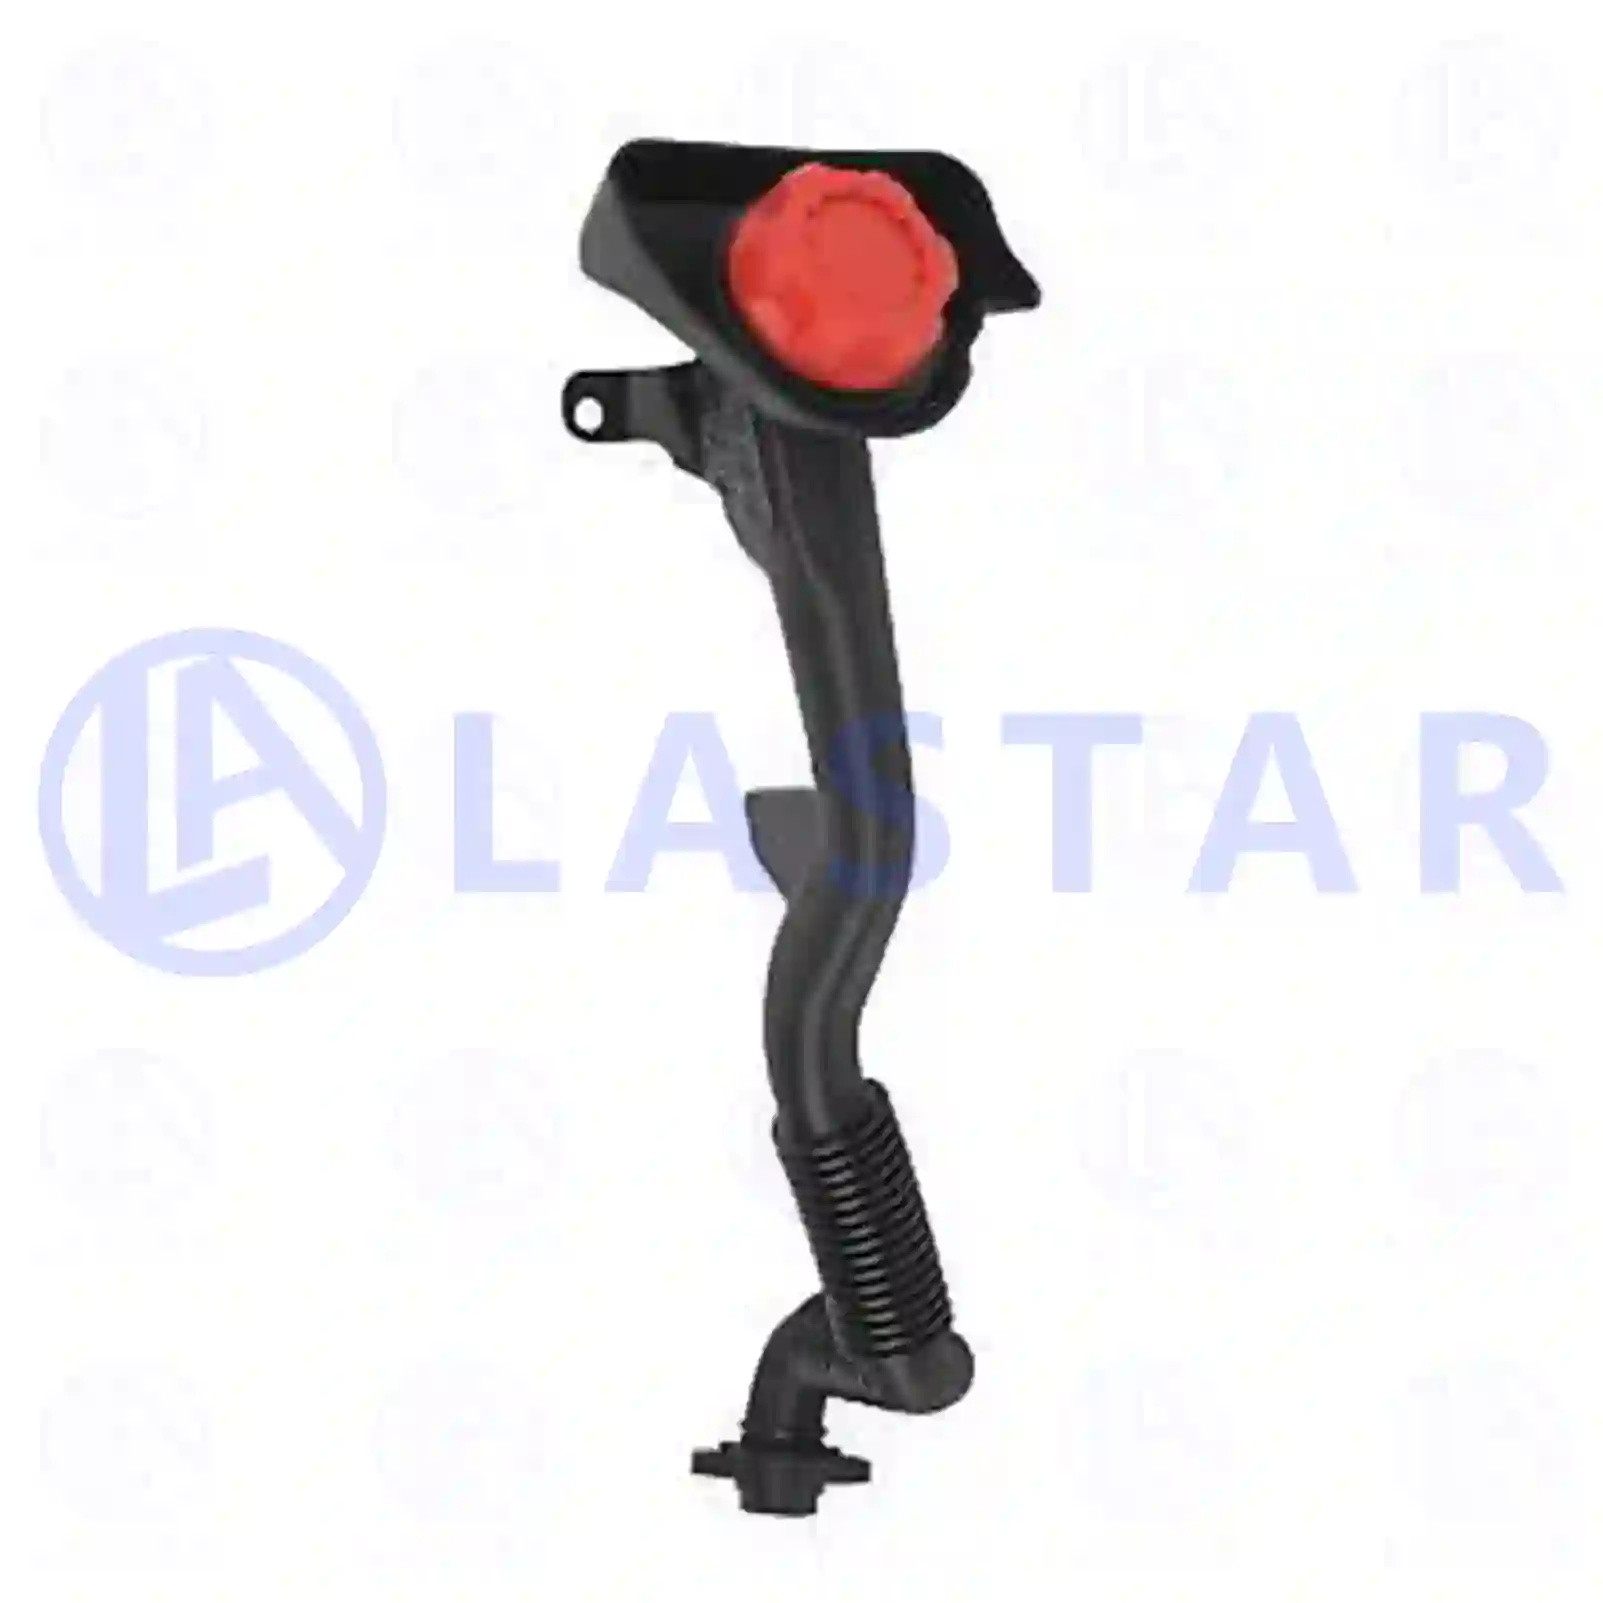 Oil filler connector, 77700763, 20412265, 20498258, 20808093 ||  77700763 Lastar Spare Part | Truck Spare Parts, Auotomotive Spare Parts Oil filler connector, 77700763, 20412265, 20498258, 20808093 ||  77700763 Lastar Spare Part | Truck Spare Parts, Auotomotive Spare Parts